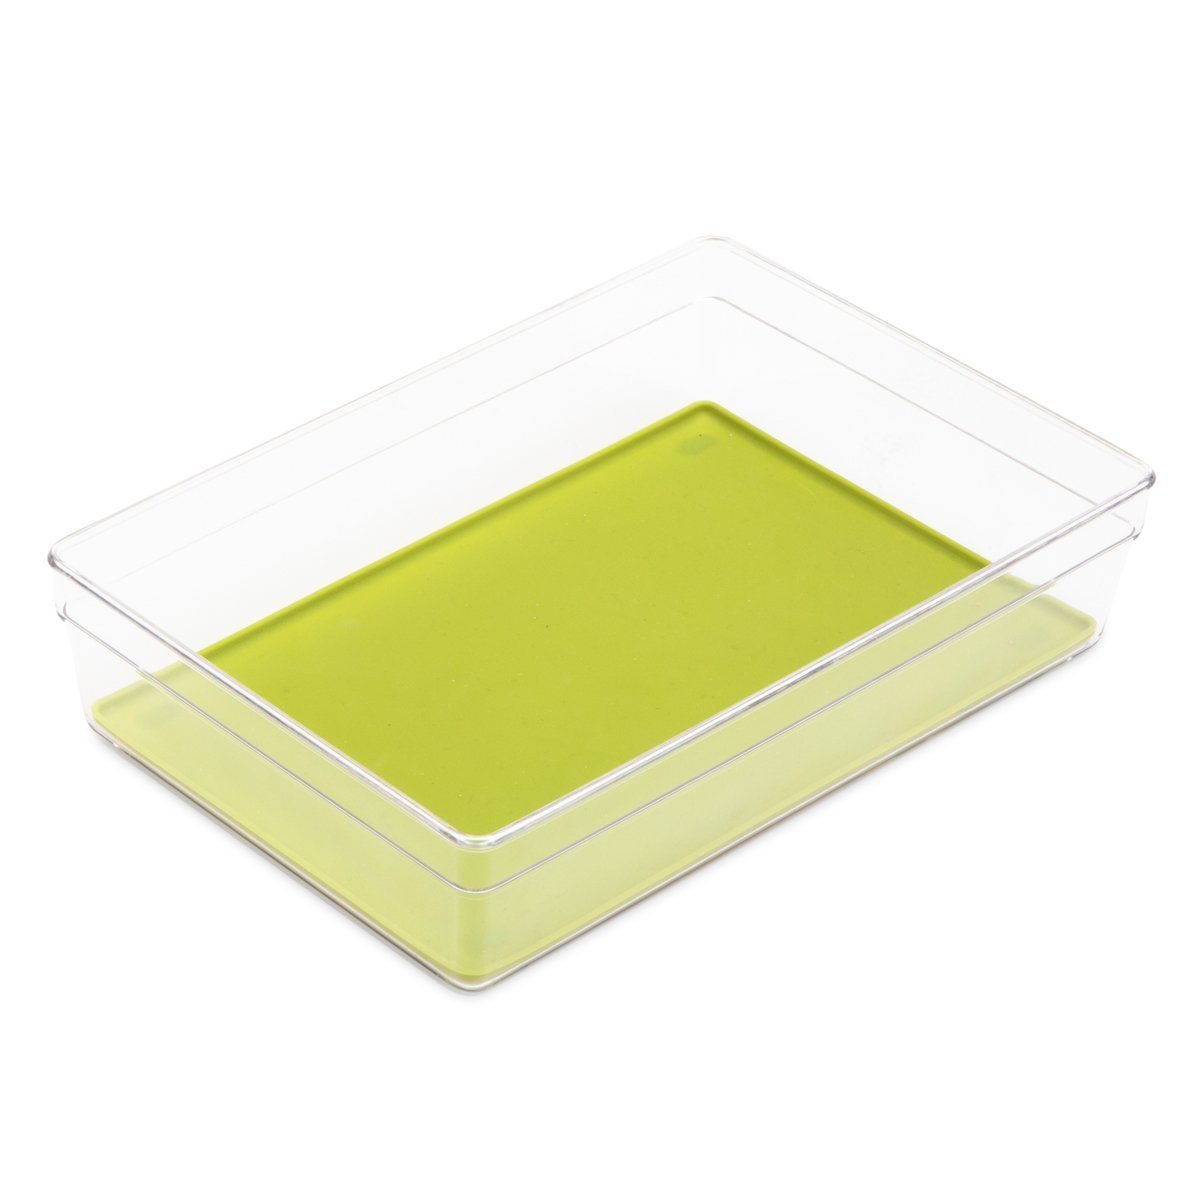 Products smart design plastic drawer organizer w silicone bottoms bpa free for utensils flatware or office items home organization 9 x 6 inch green